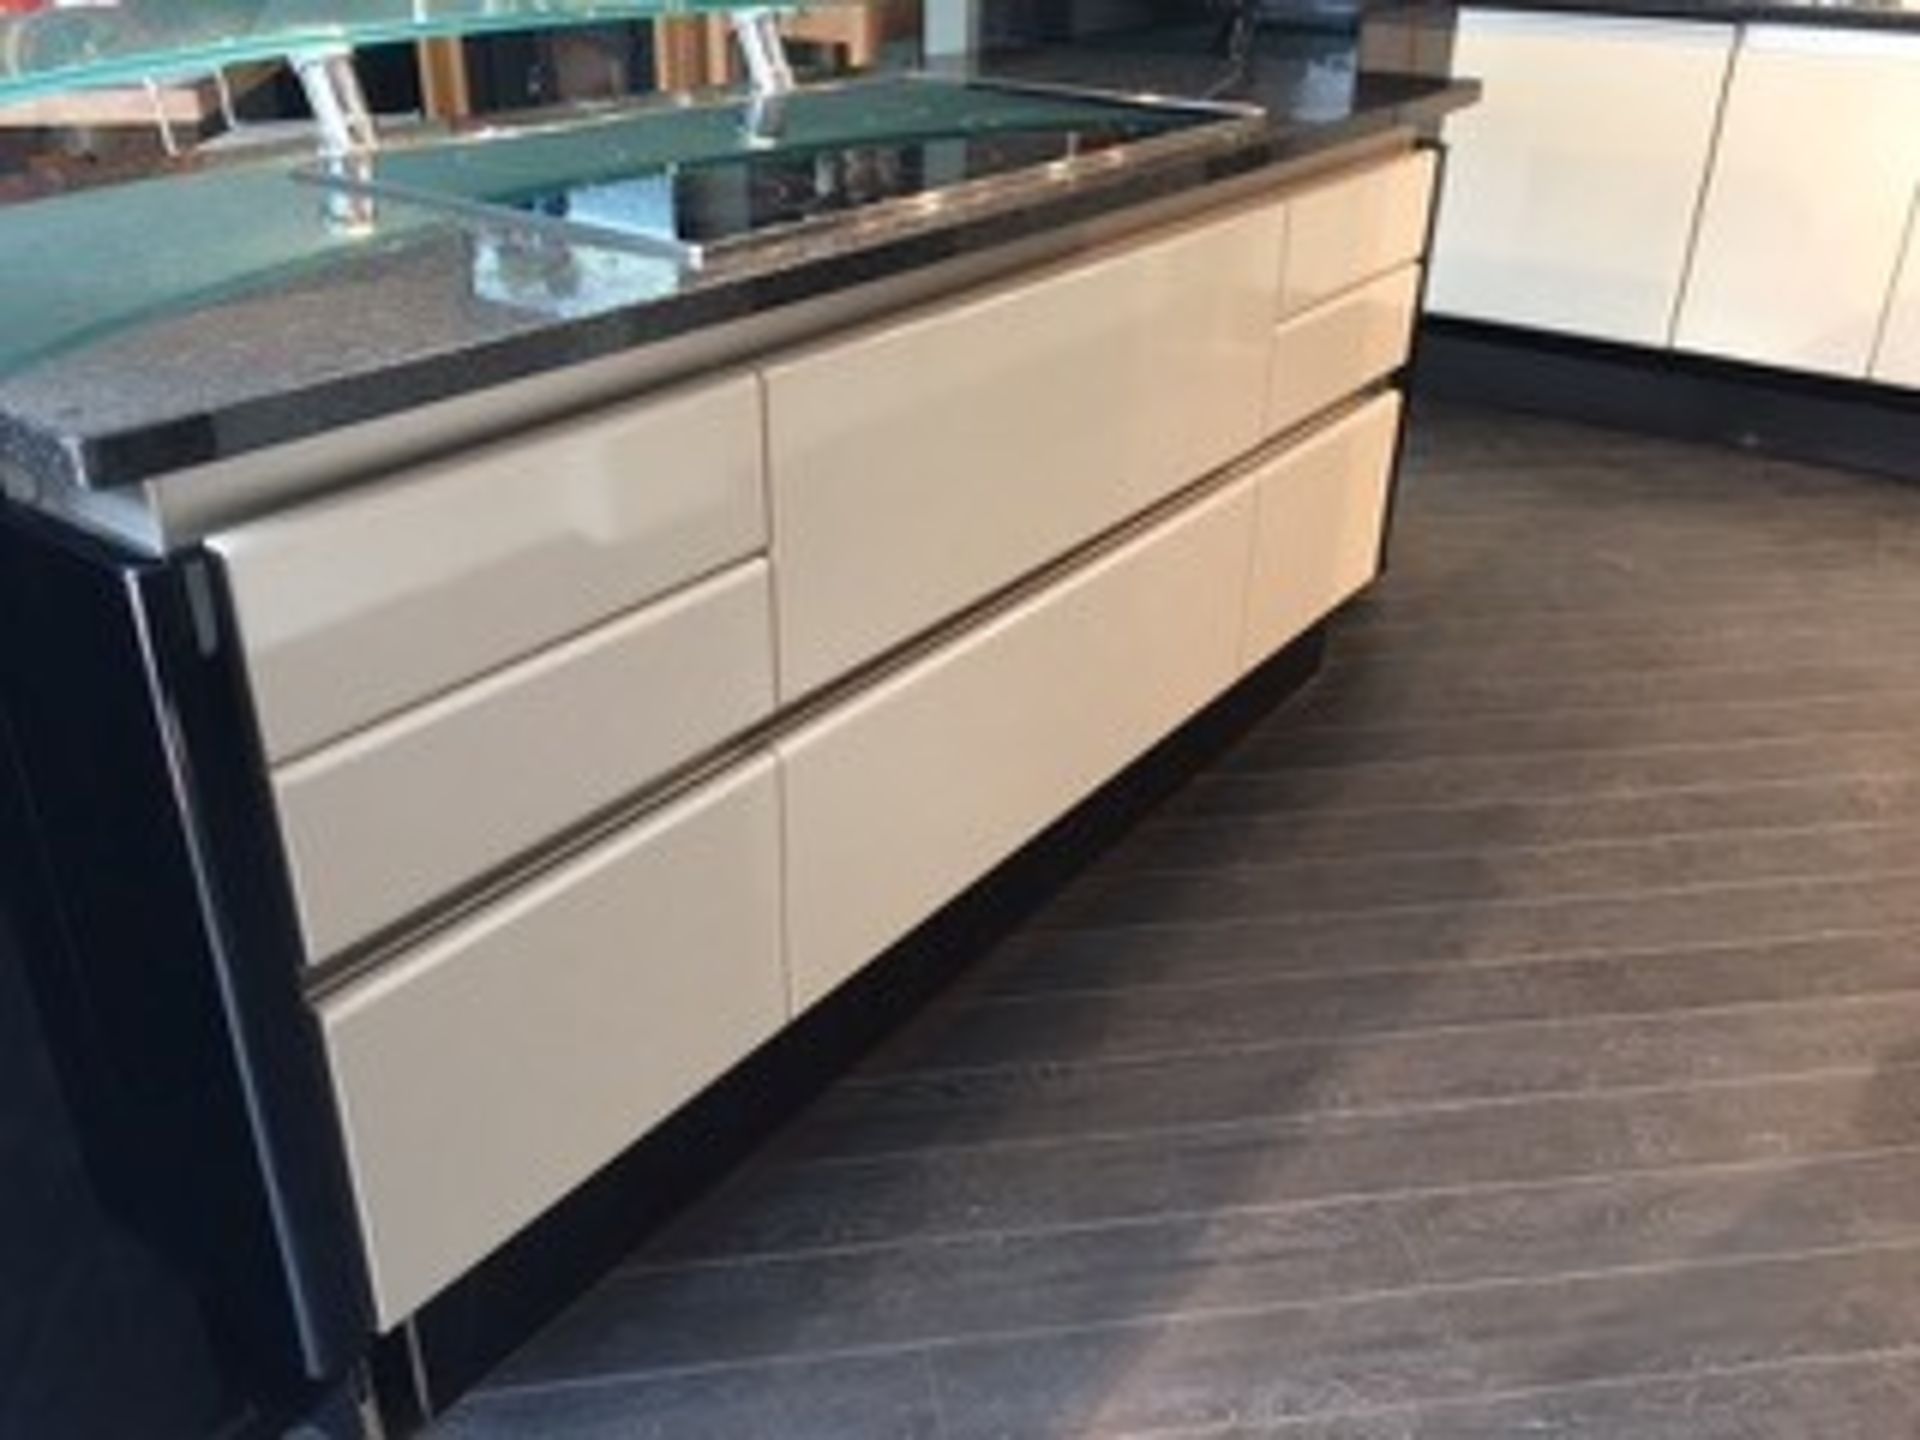 1 x Siematic Kitchen Island With Miele Hob, Gaggenau Extractor, Generous Drawer Storage And - Image 2 of 16